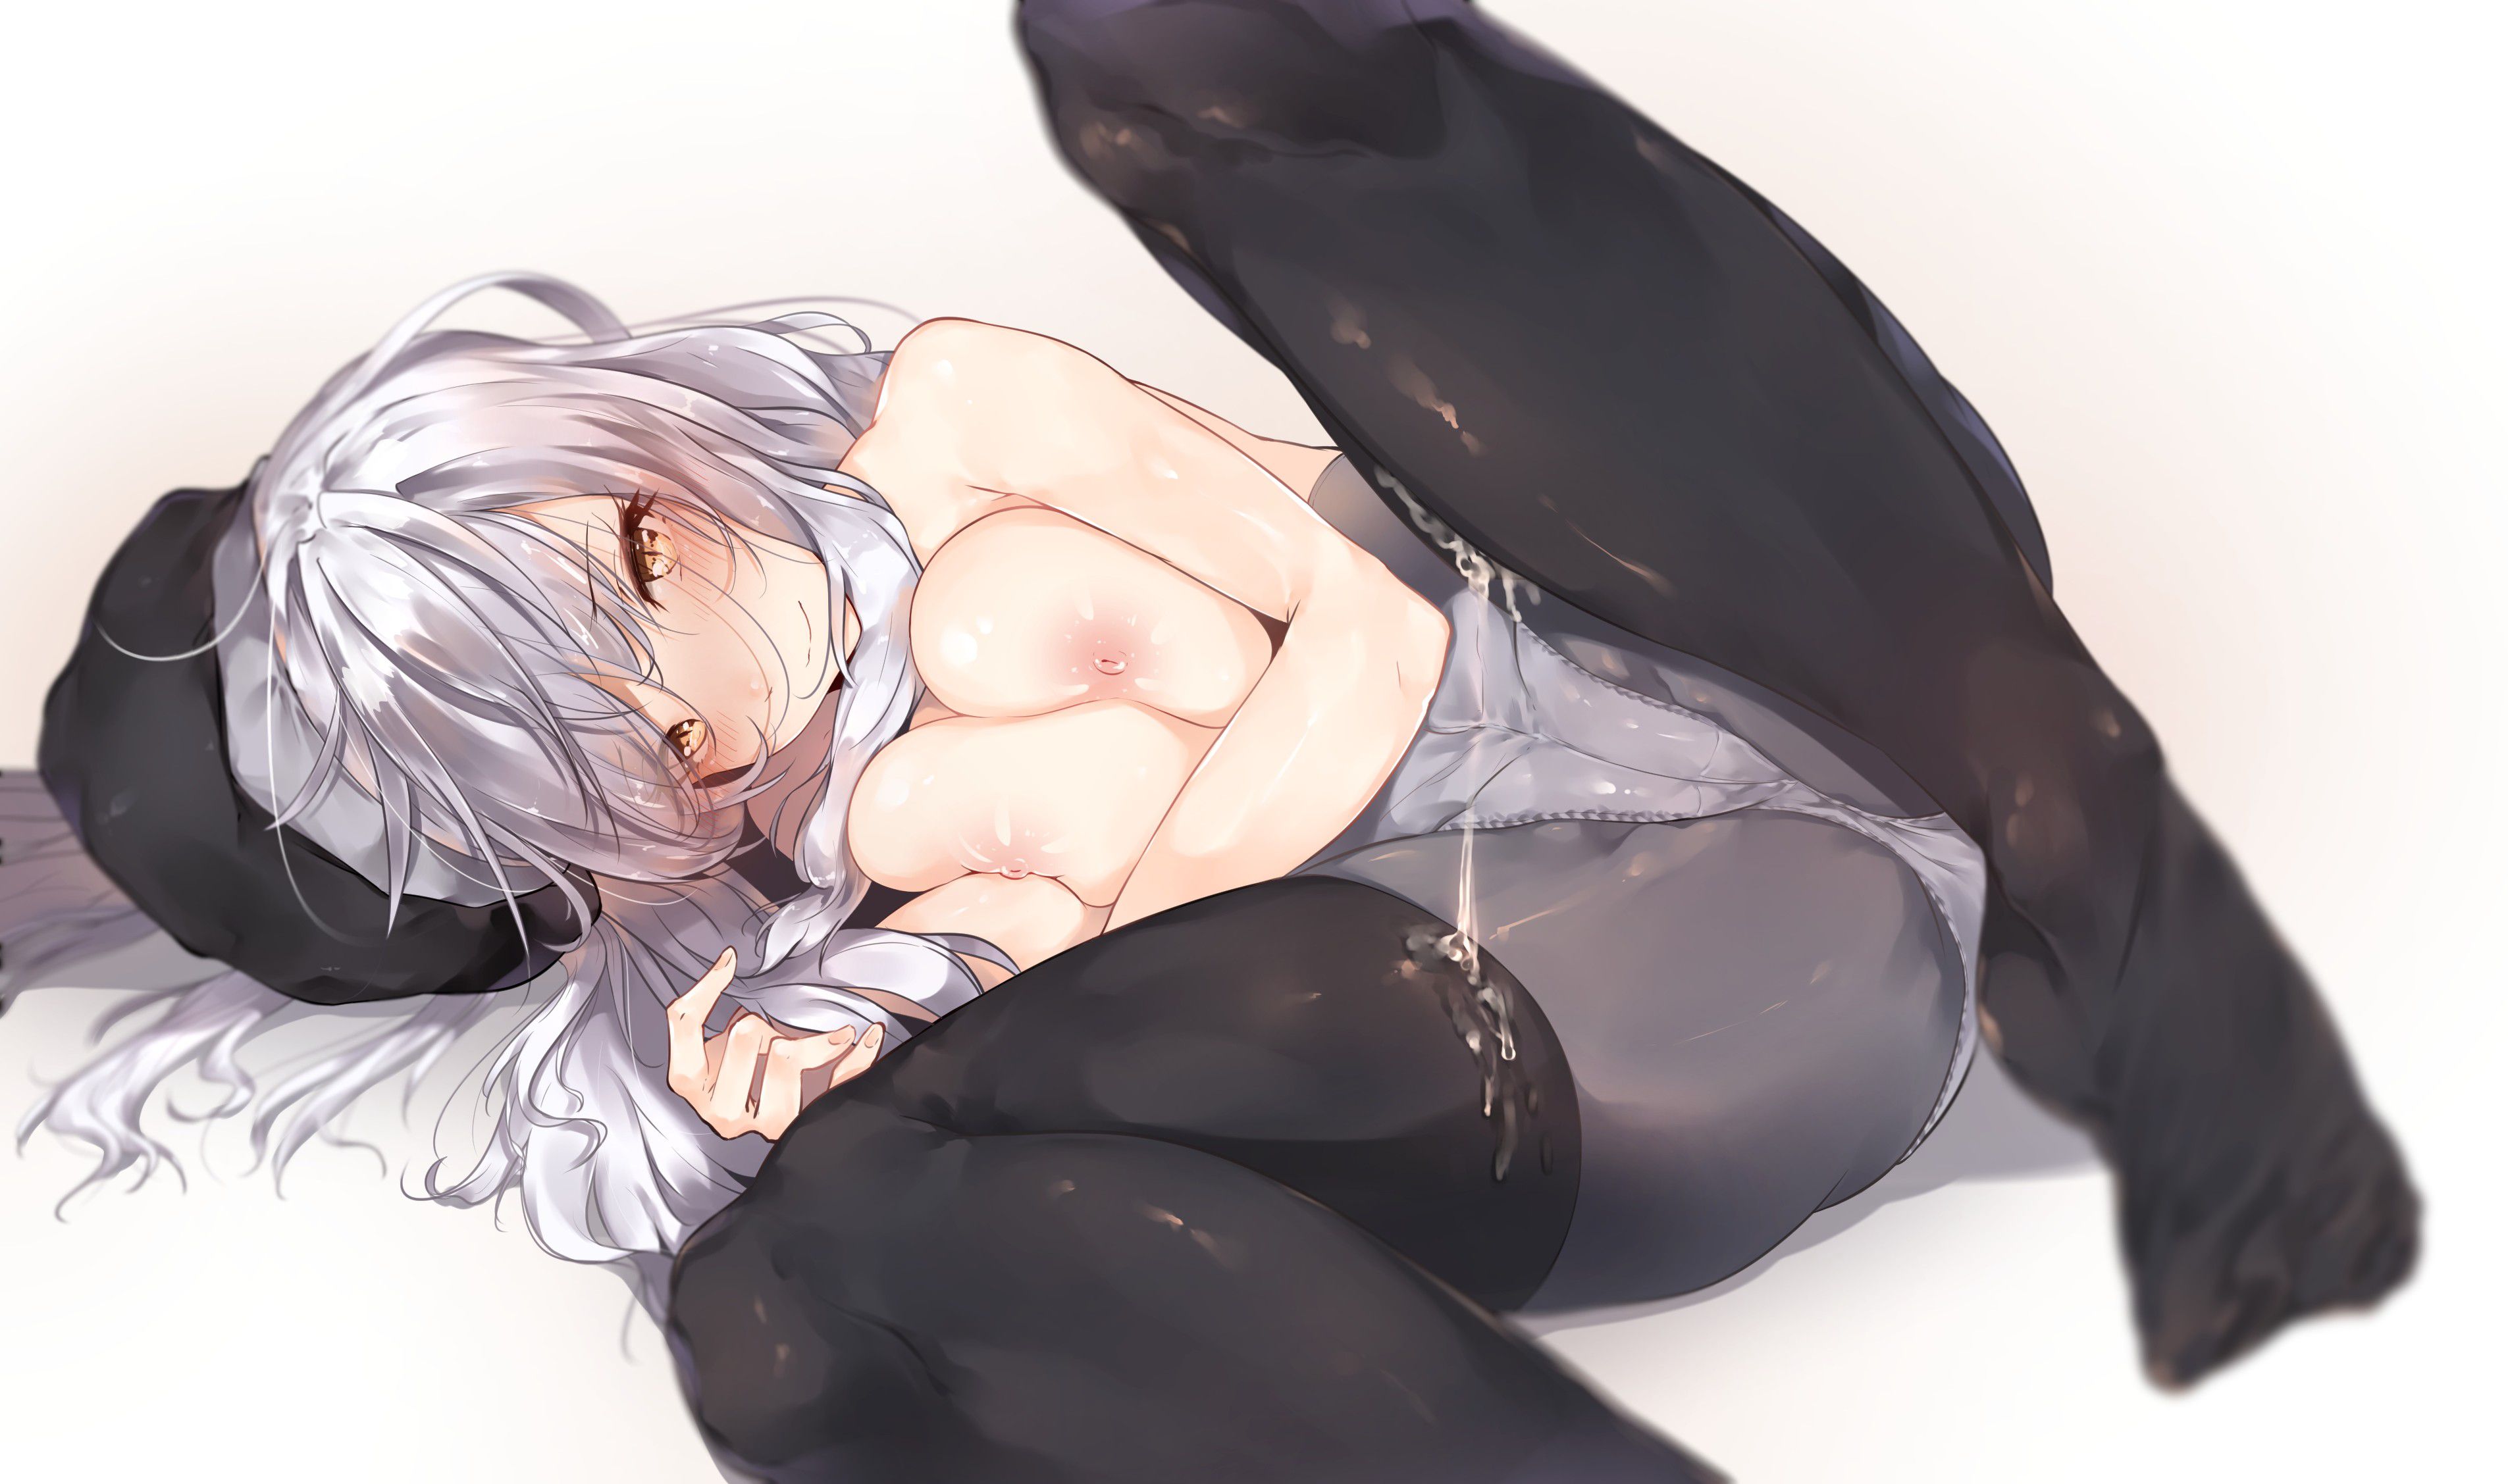 【Secondary erotic】Erotic image of a naughty girl with silver hair and a body is here 3